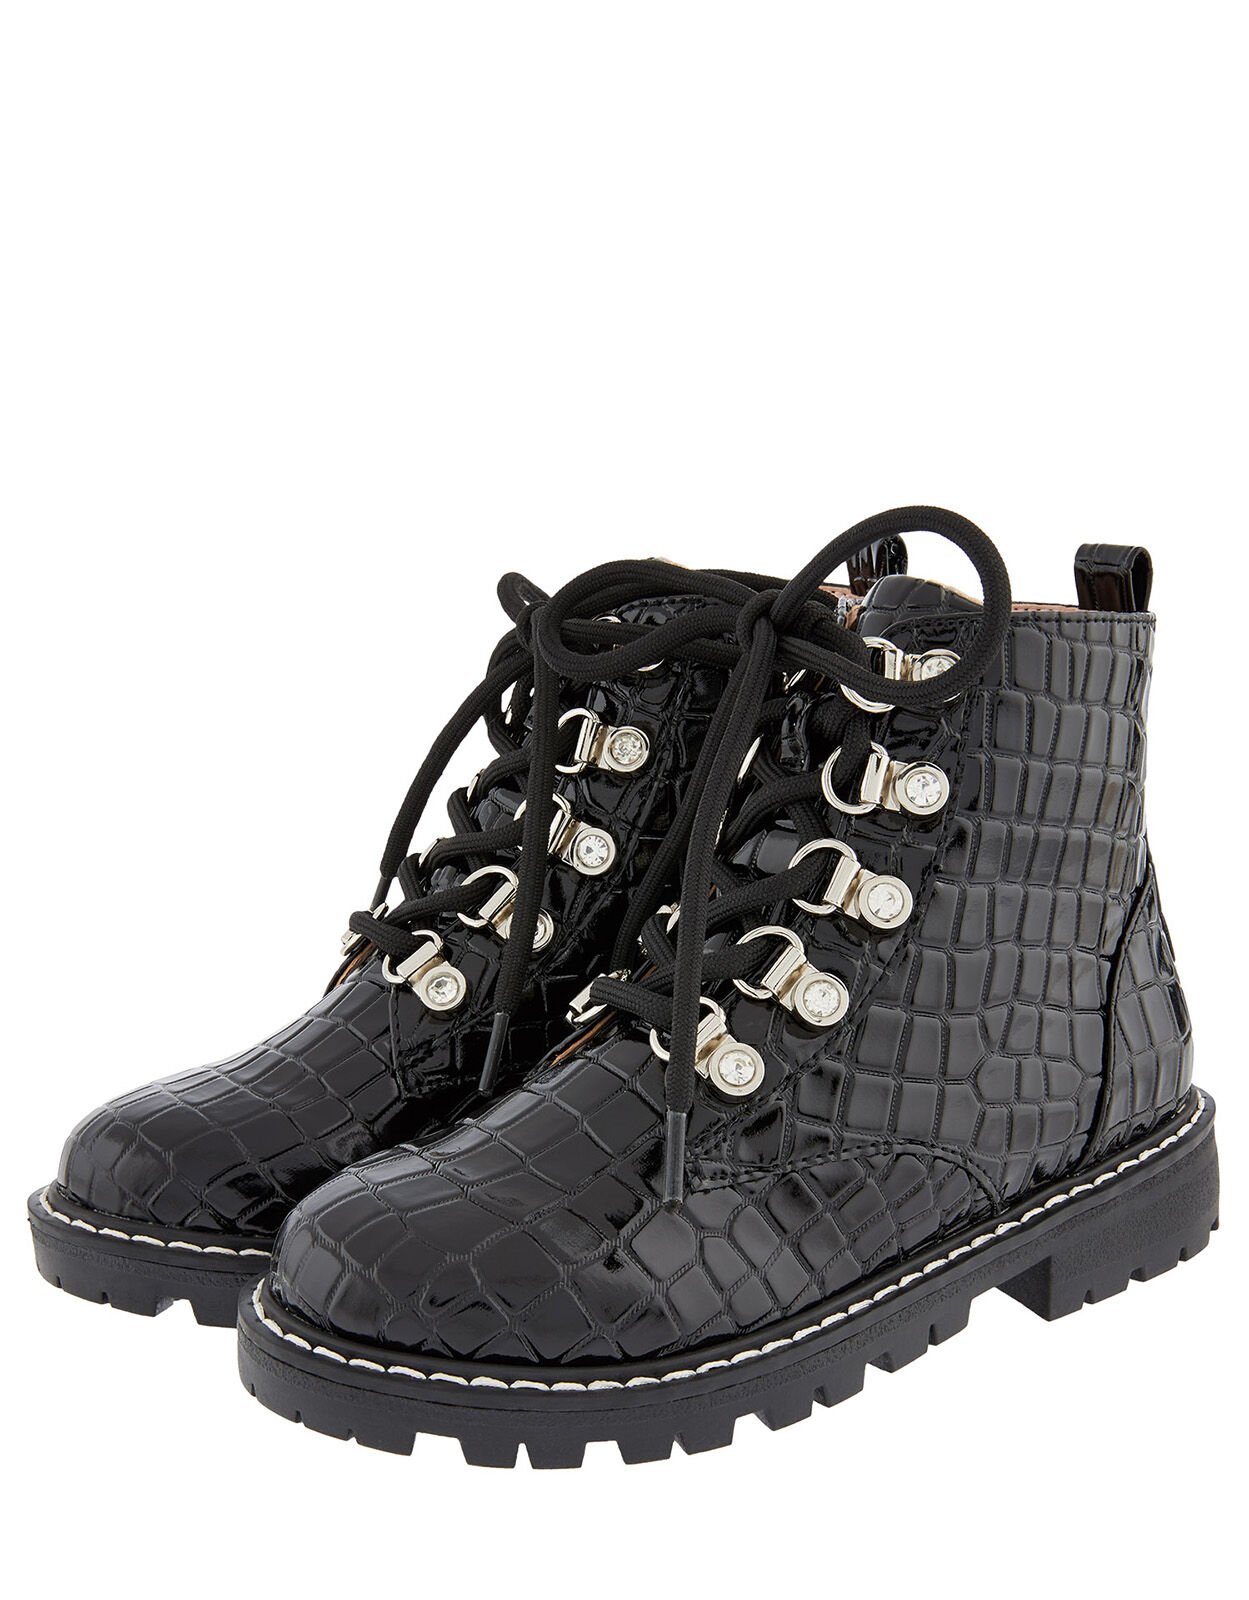 black lace up ankle boots uk